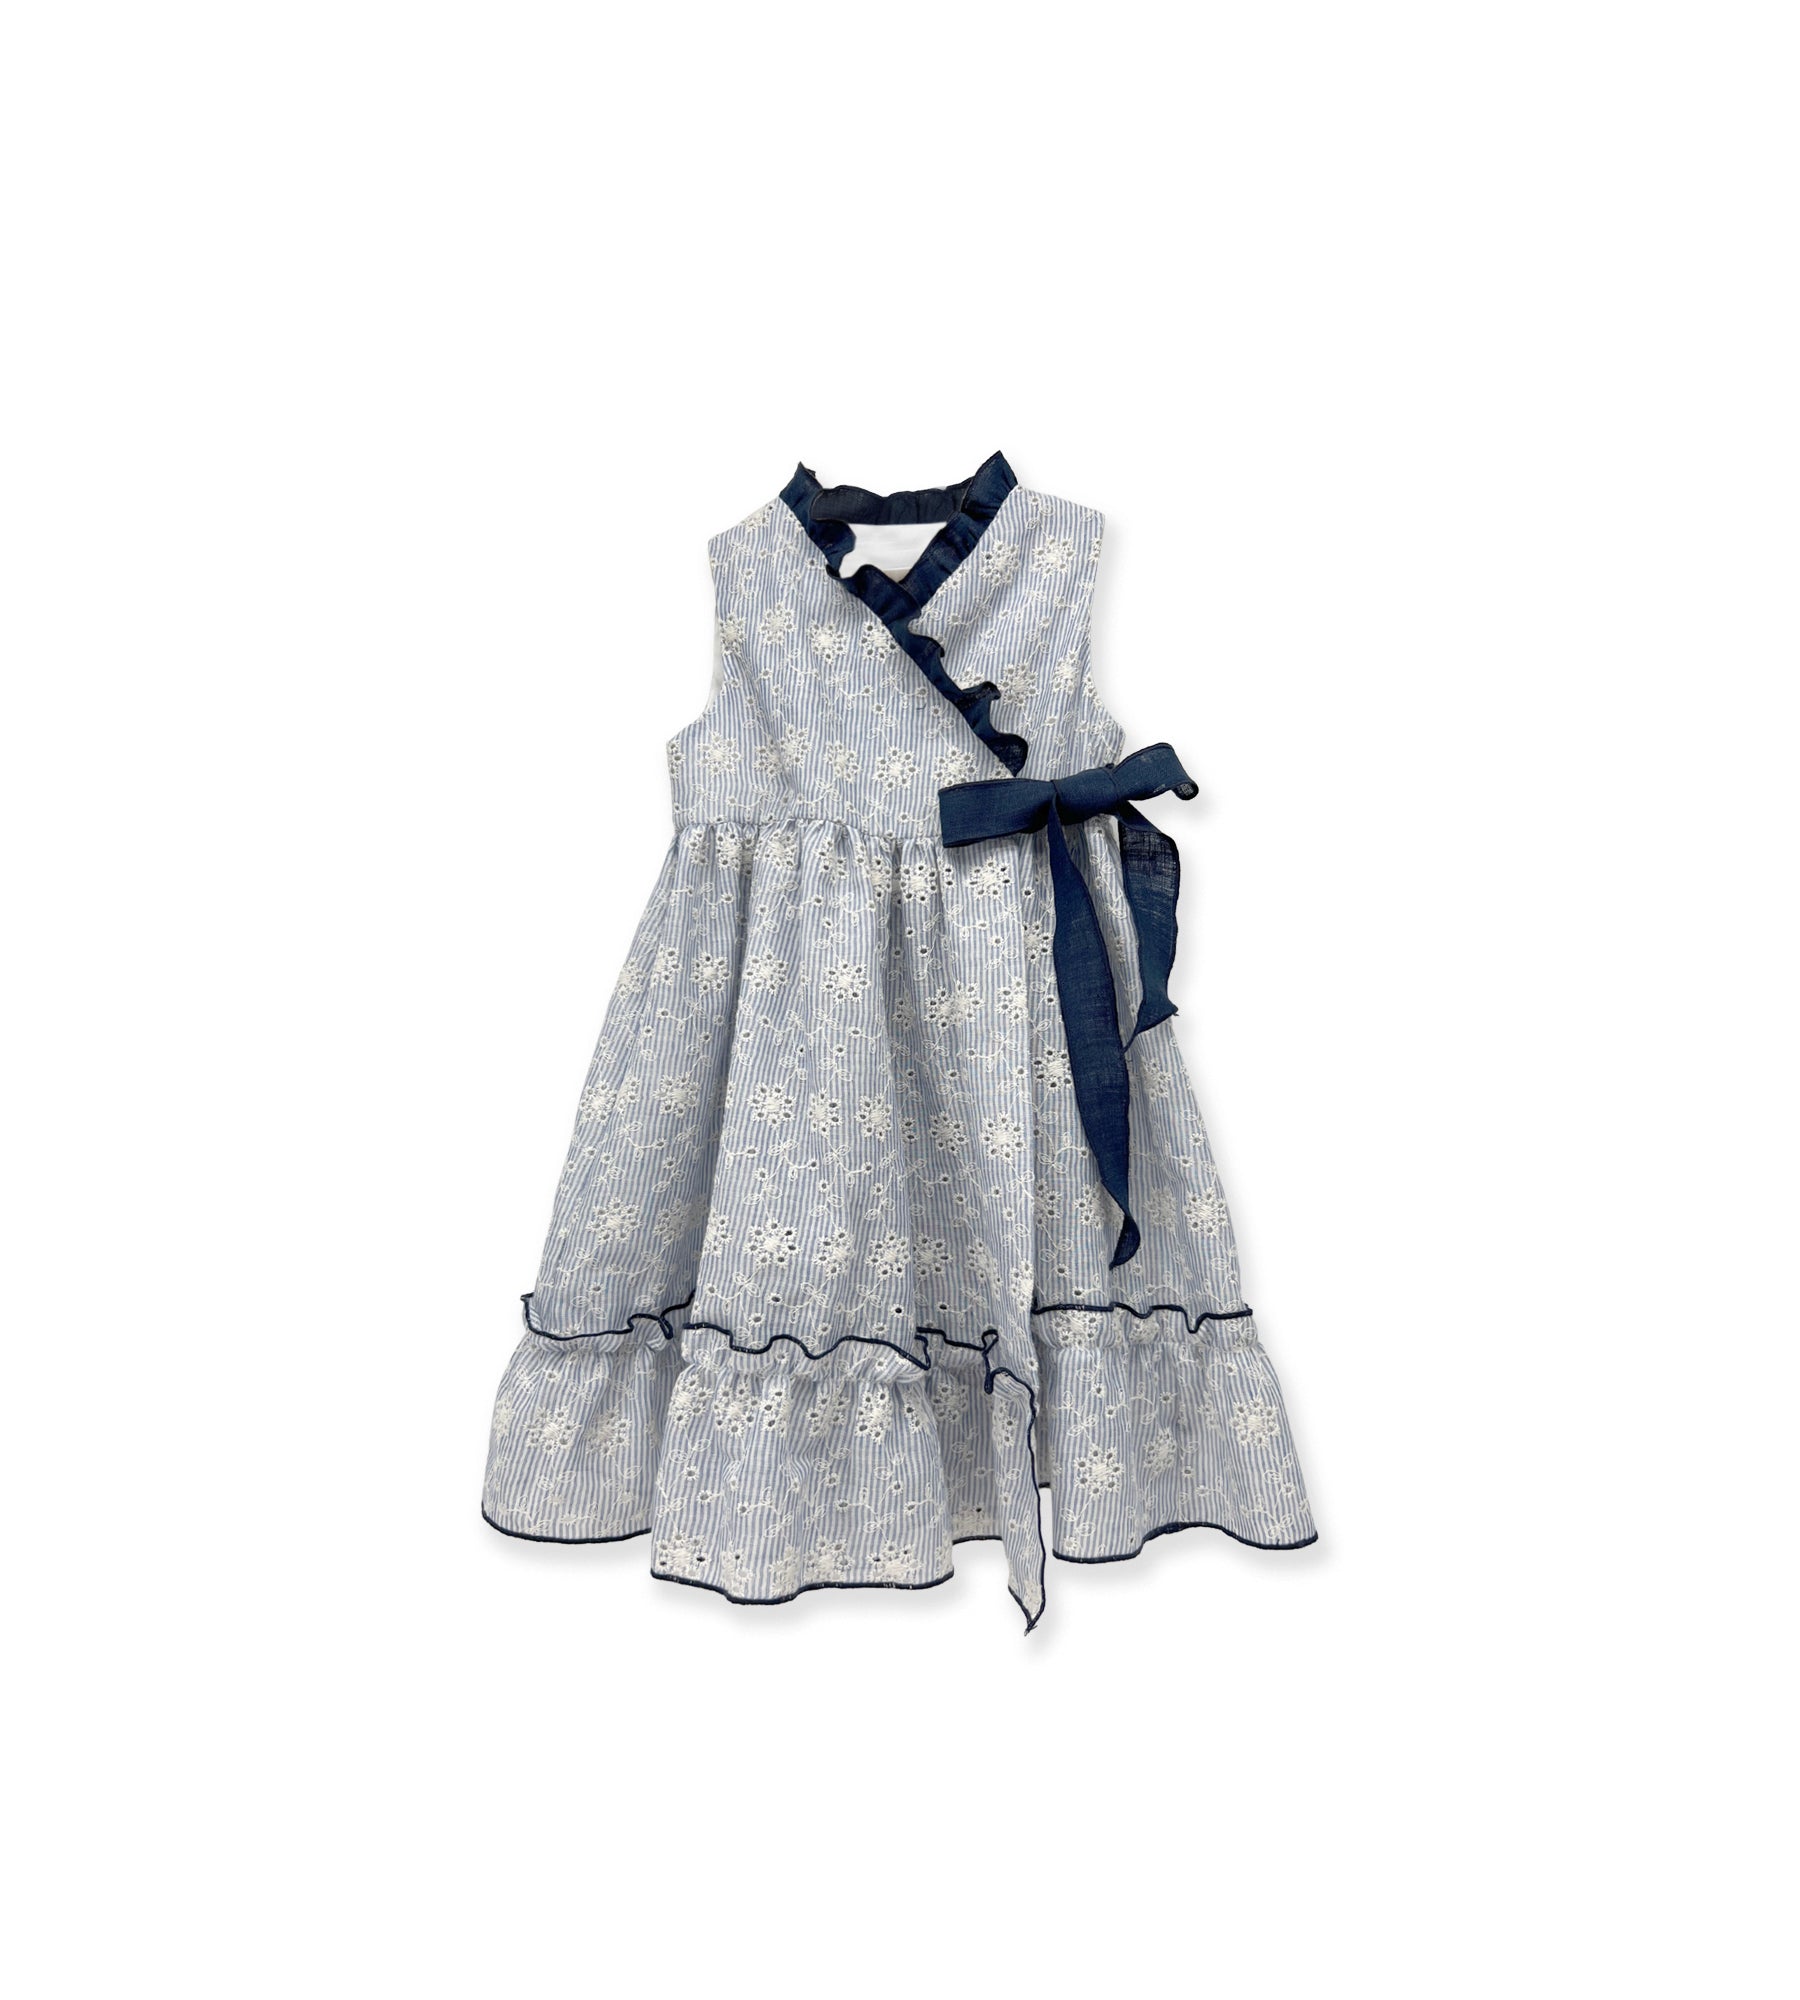 BLUE STRIPED DRESS AND EMBROIDERIES